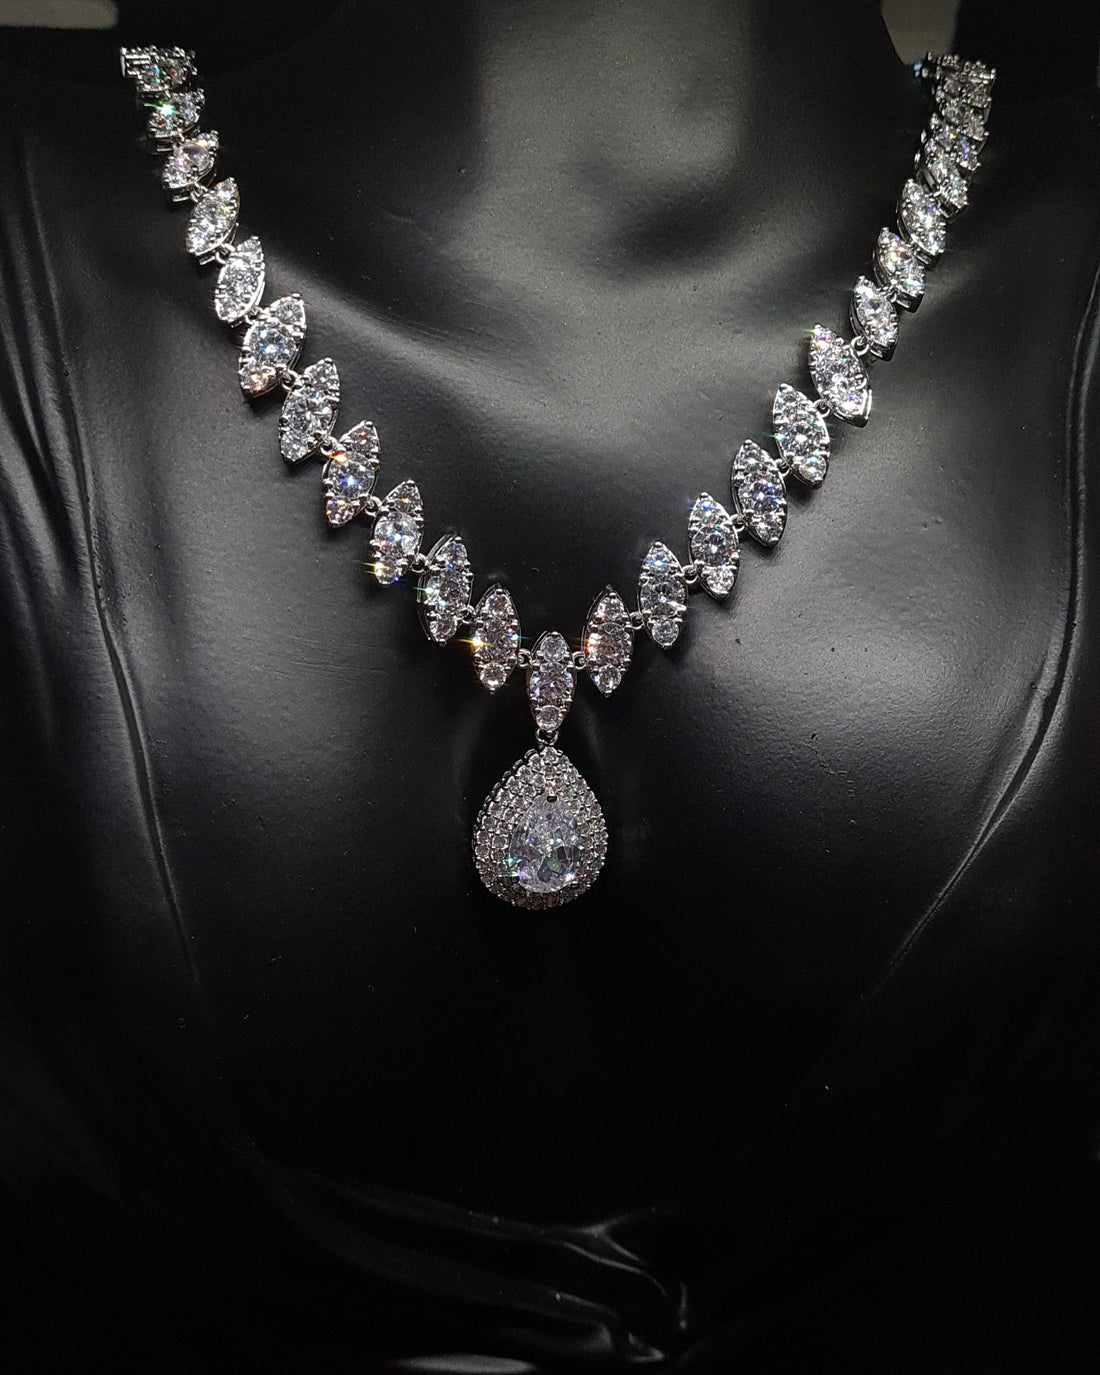 Sparkling cubic zirconia Else necklace, perfect for any occasion